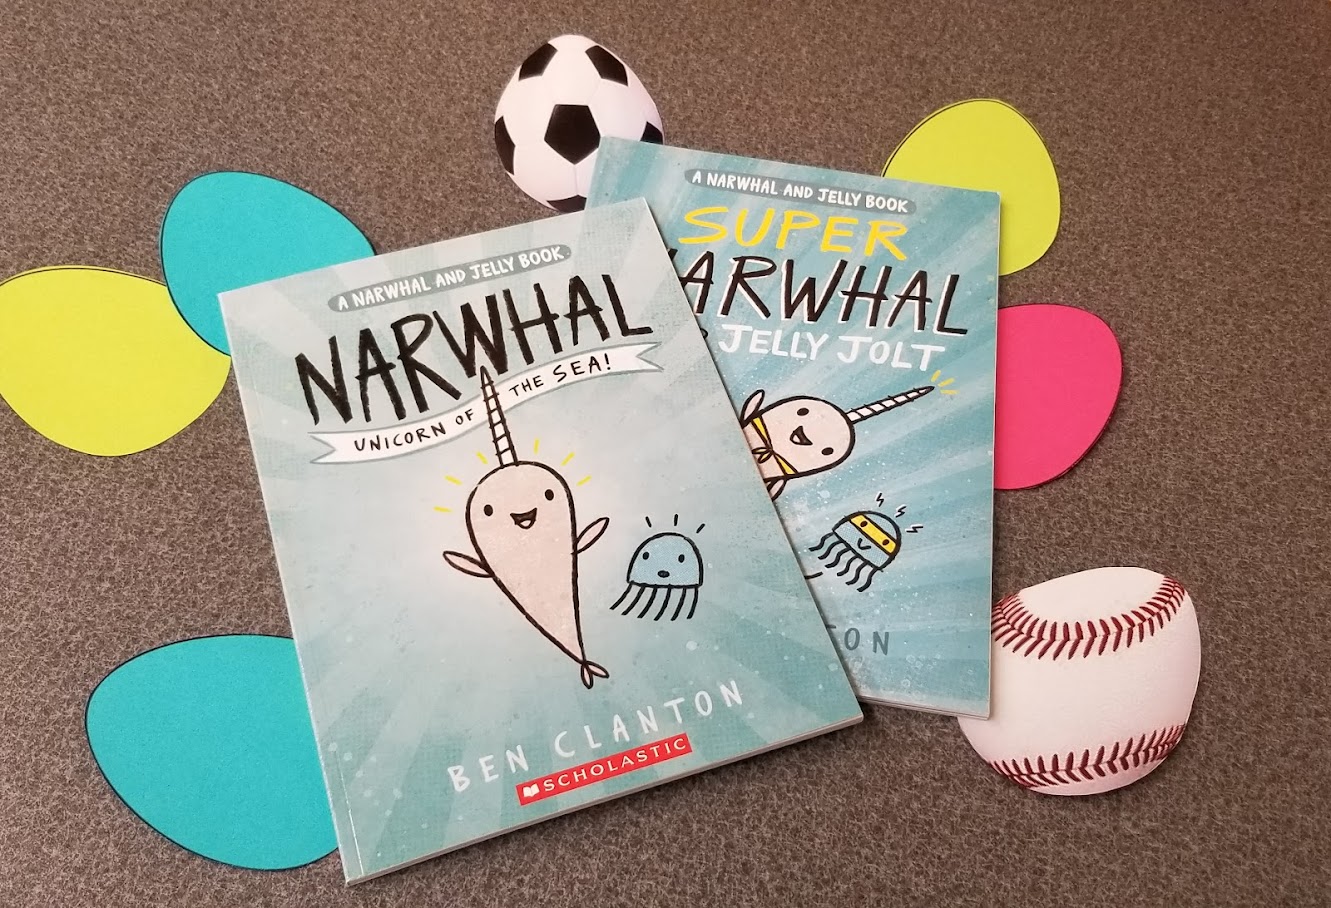 Two books from the Narwhal series by Ben Clanton.